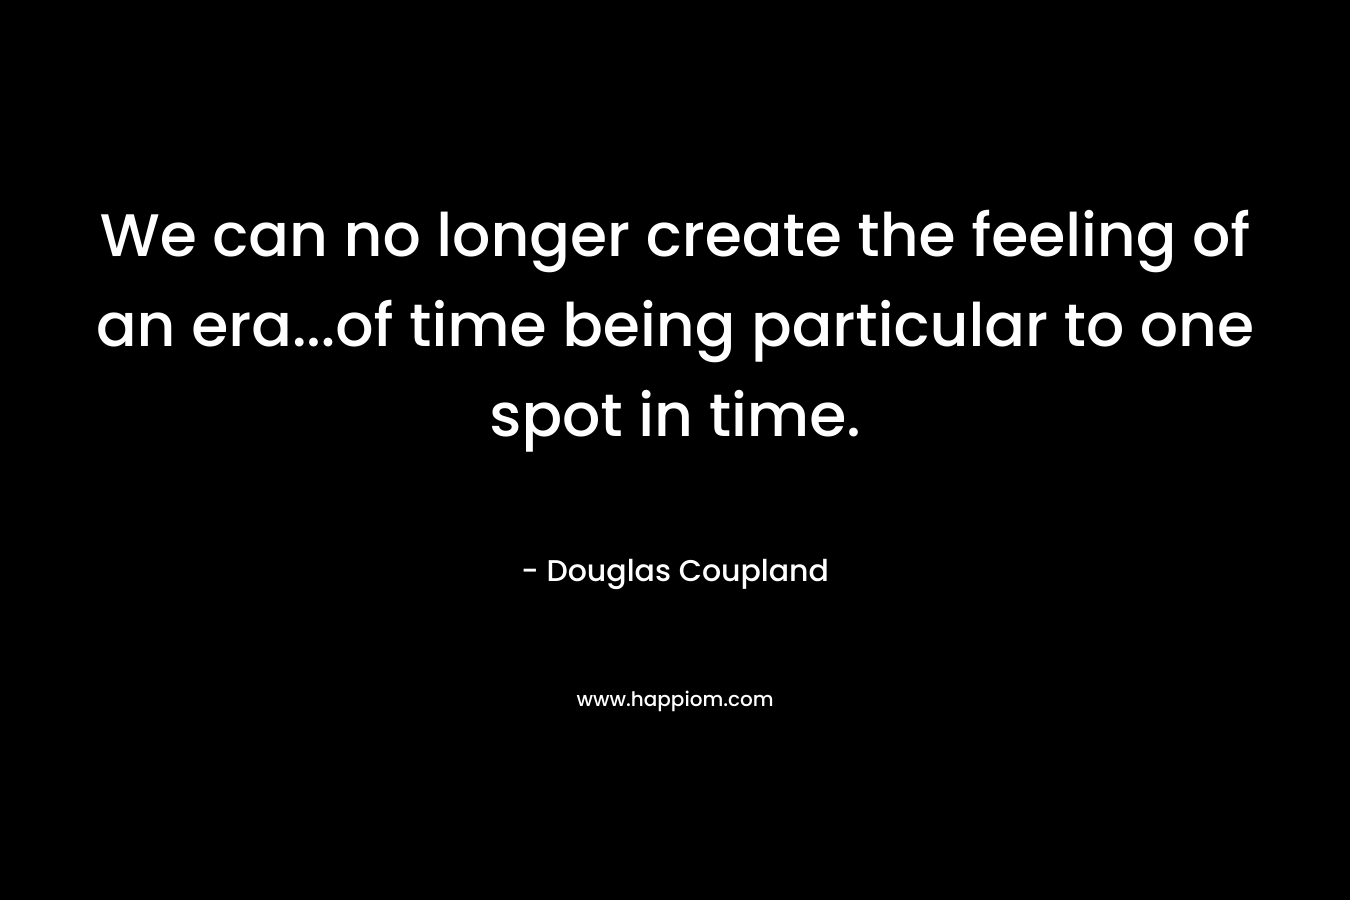 We can no longer create the feeling of an era...of time being particular to one spot in time.